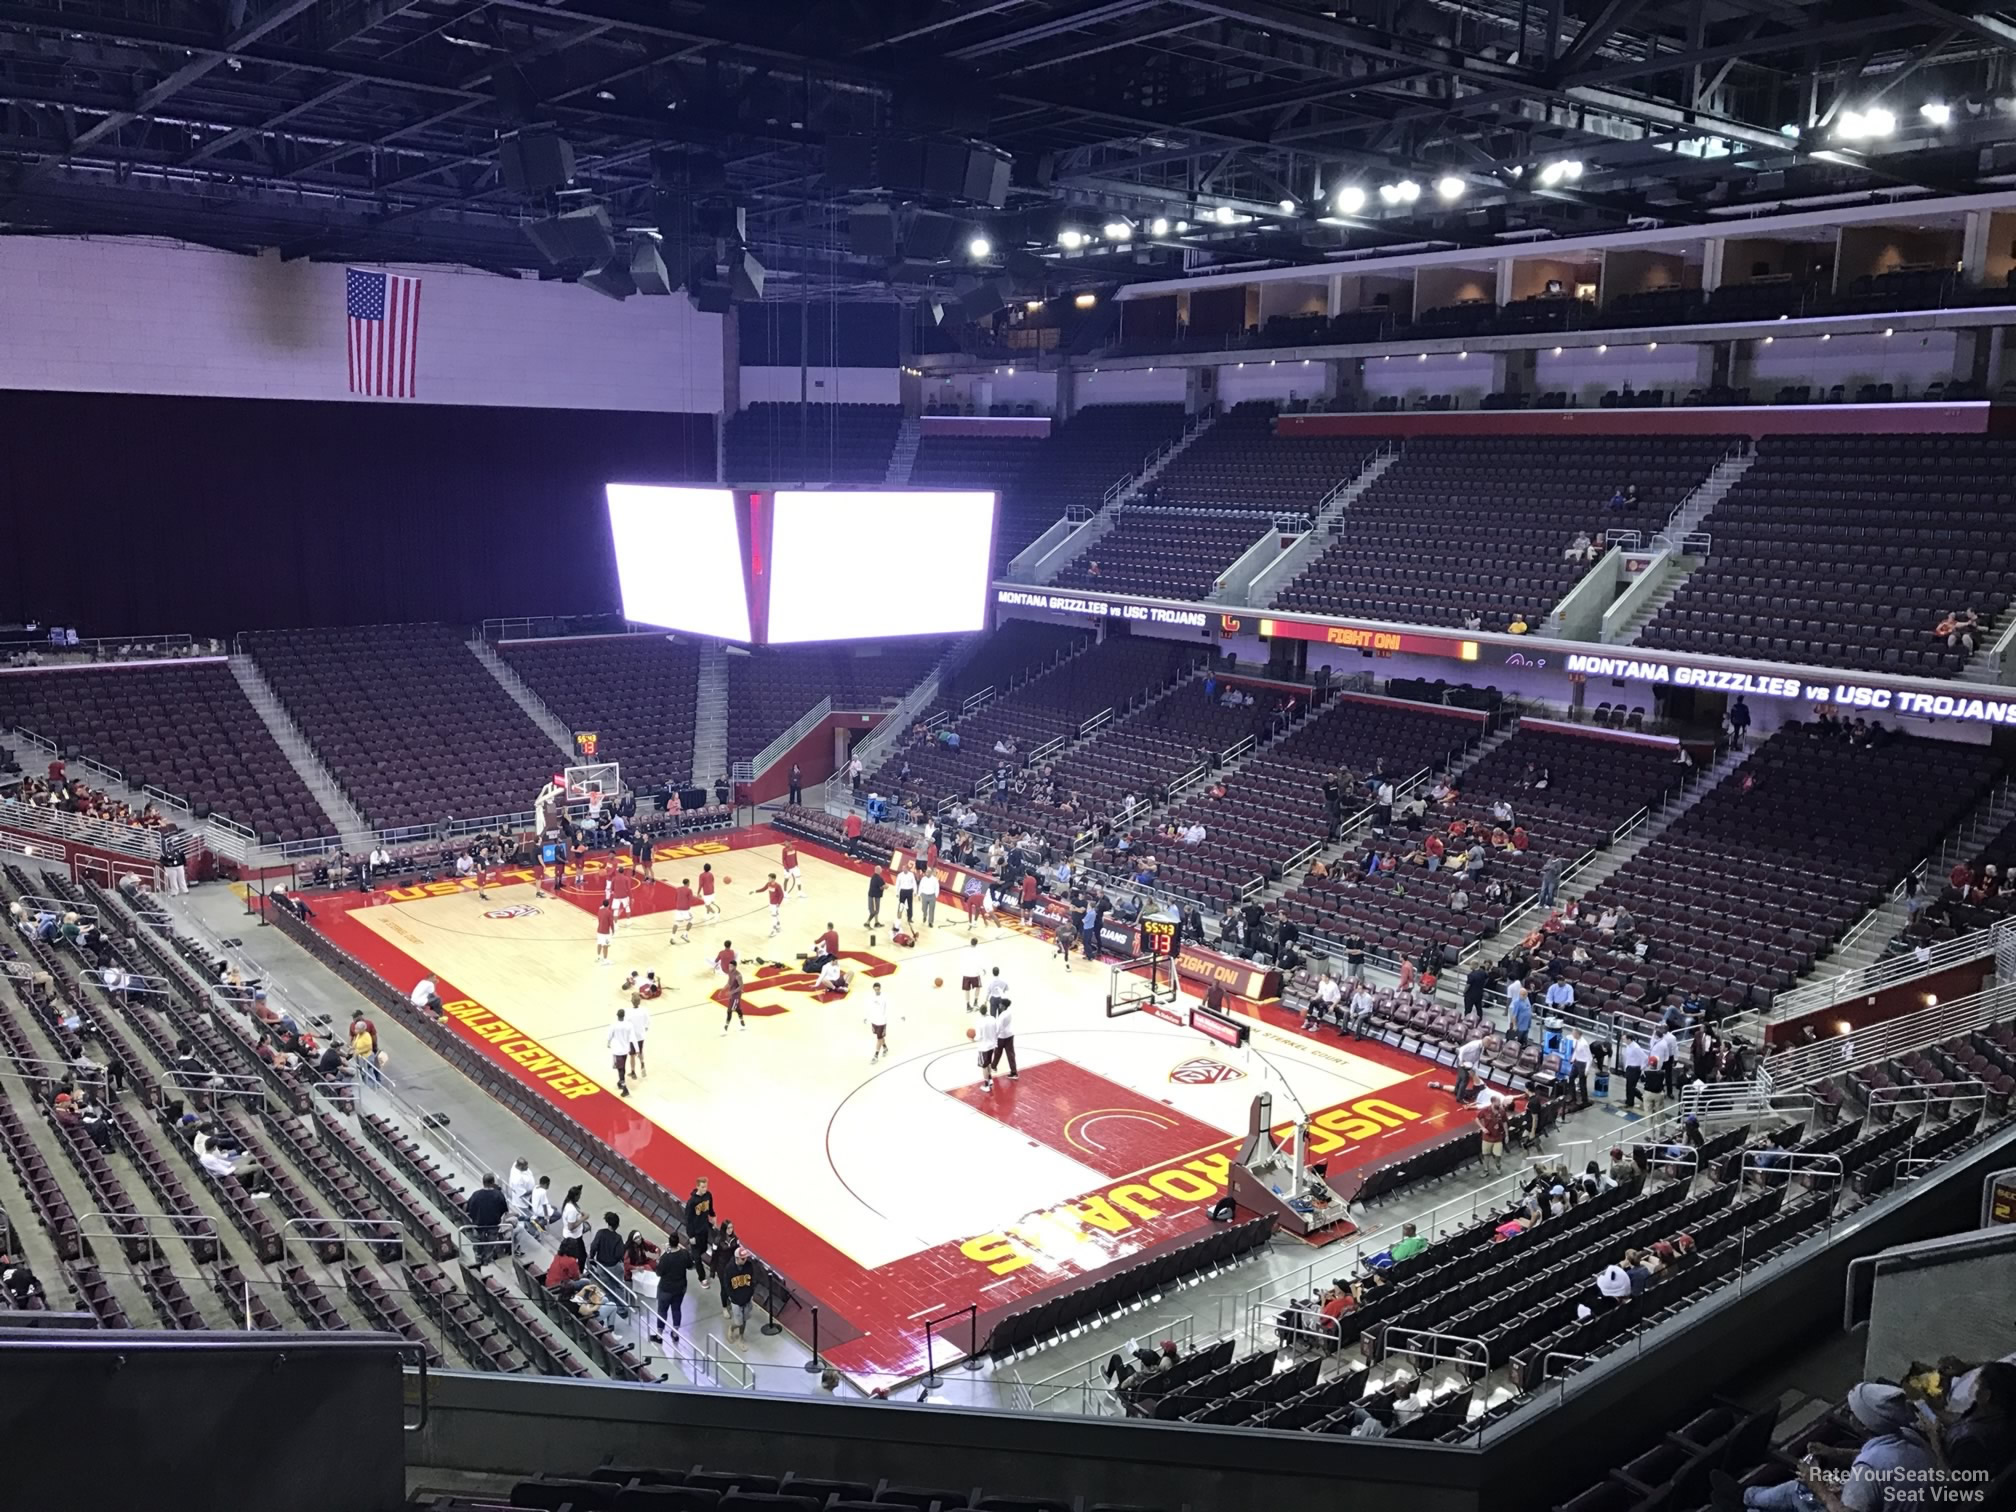 section 209, row 10 seat view  - galen center